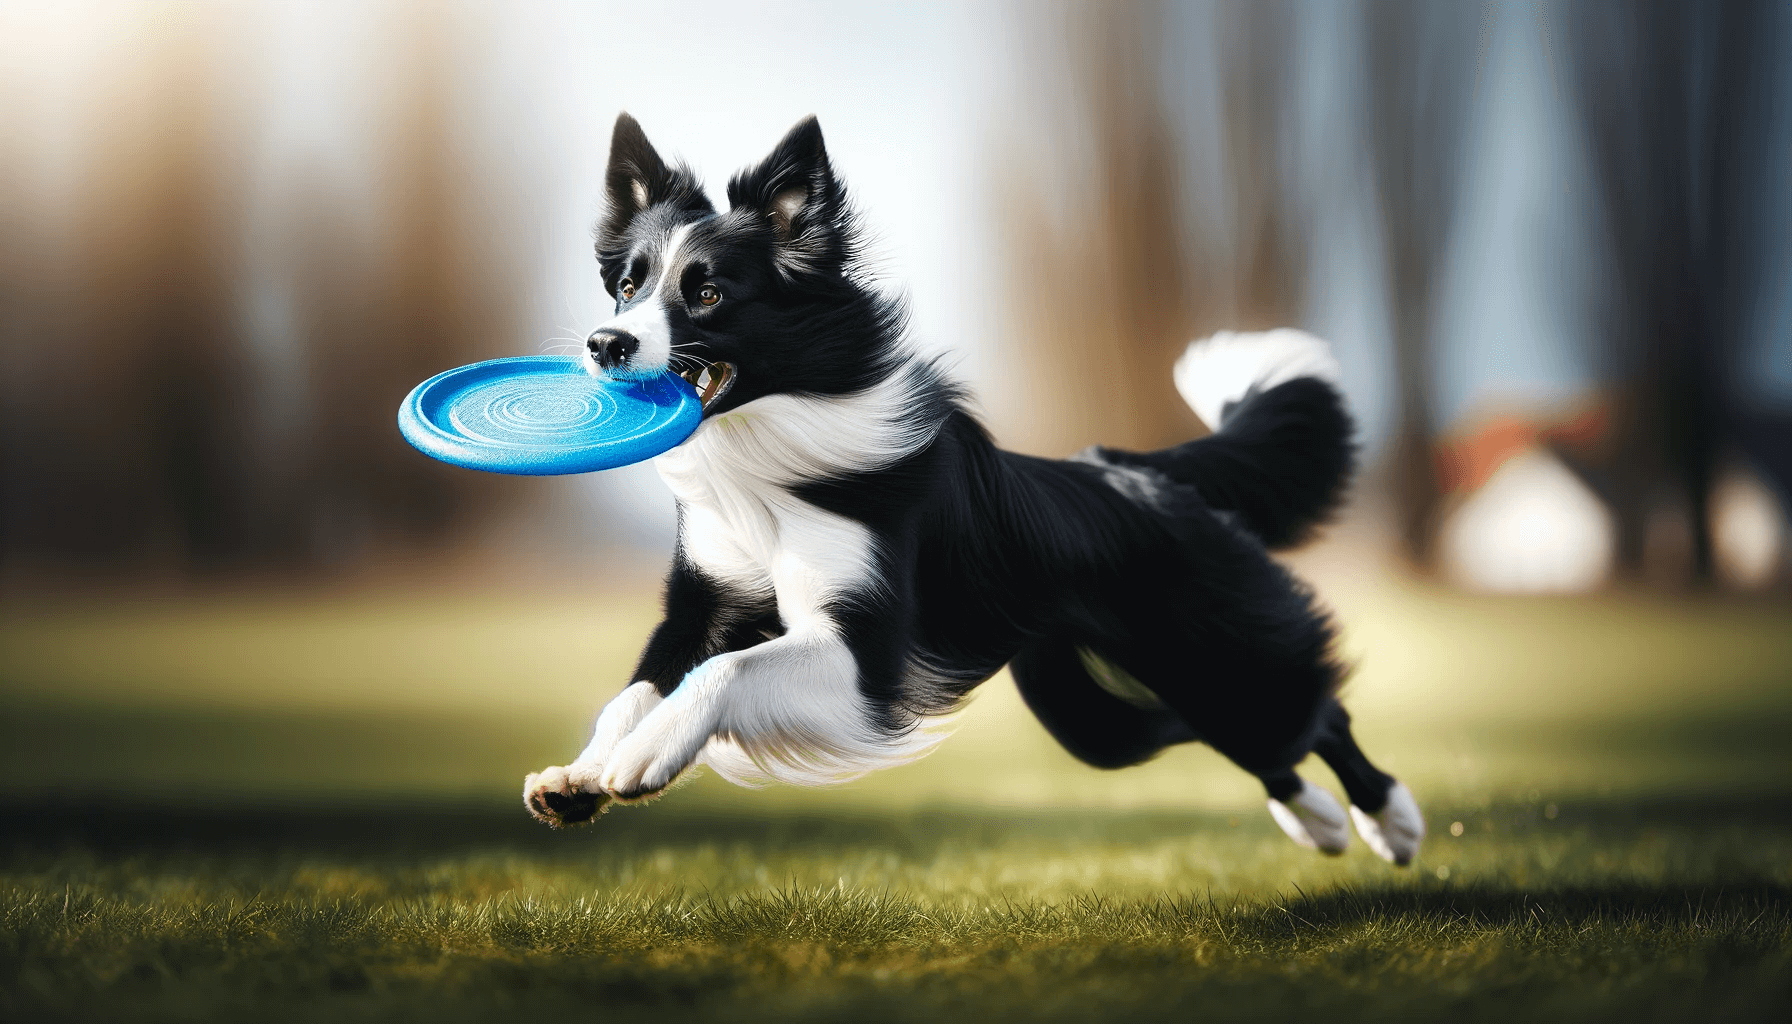 Smooth Coat Border Collie running energetically through a grassy field with a blue frisbee in its mouth, showcasing the breed.